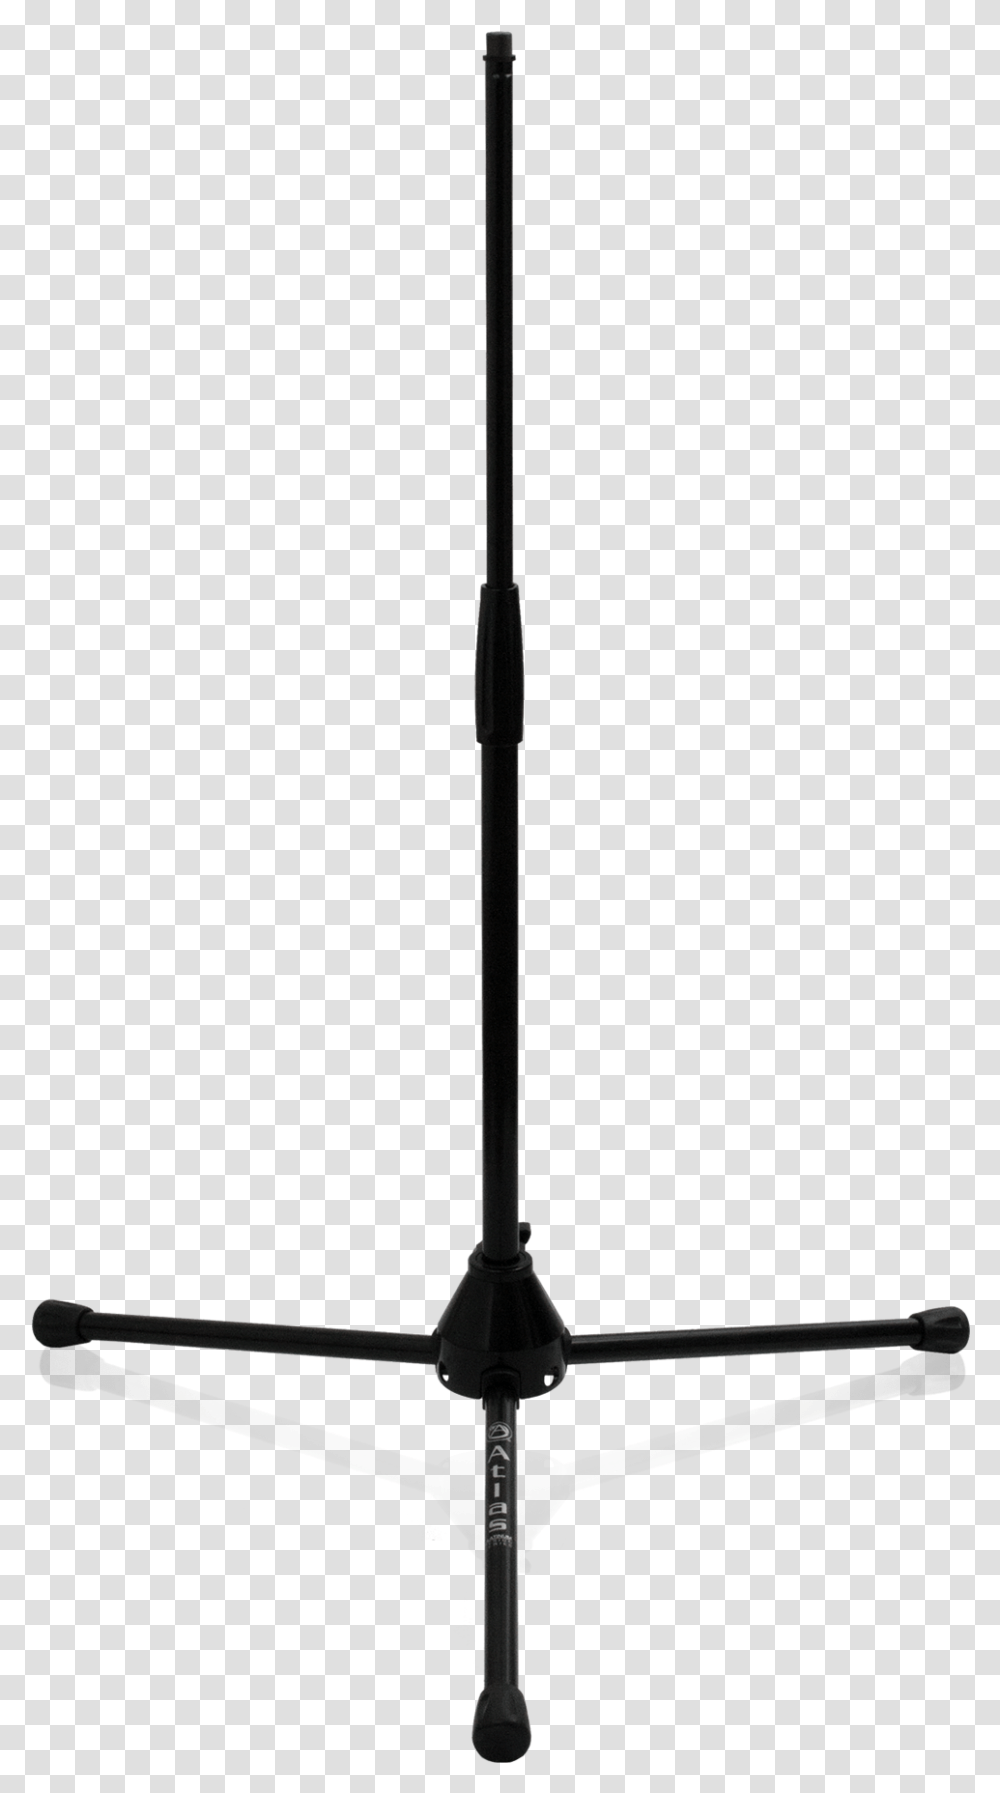 Adjustable Height Tv Ceiling Mount, Sword, Lamp, Antenna, Electrical Device Transparent Png